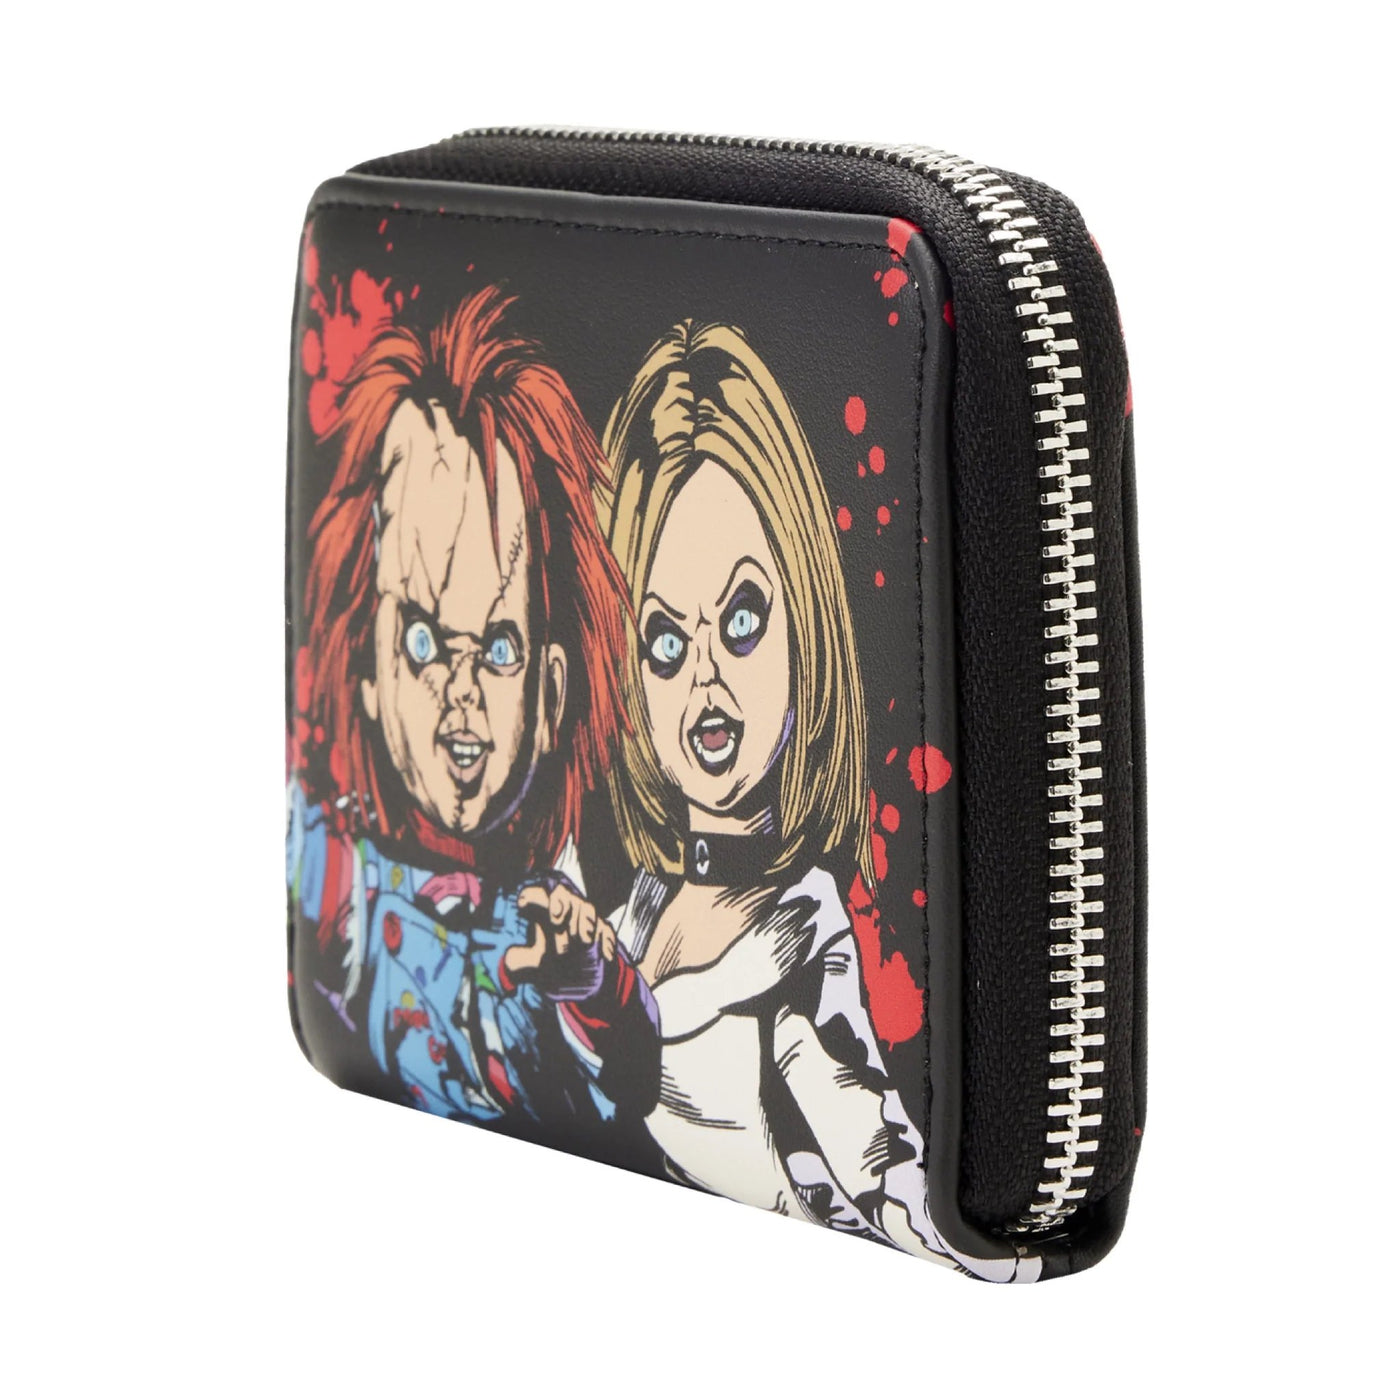 Loungefly Universal Bride of Chucky Zip-Around Wallet - Side View